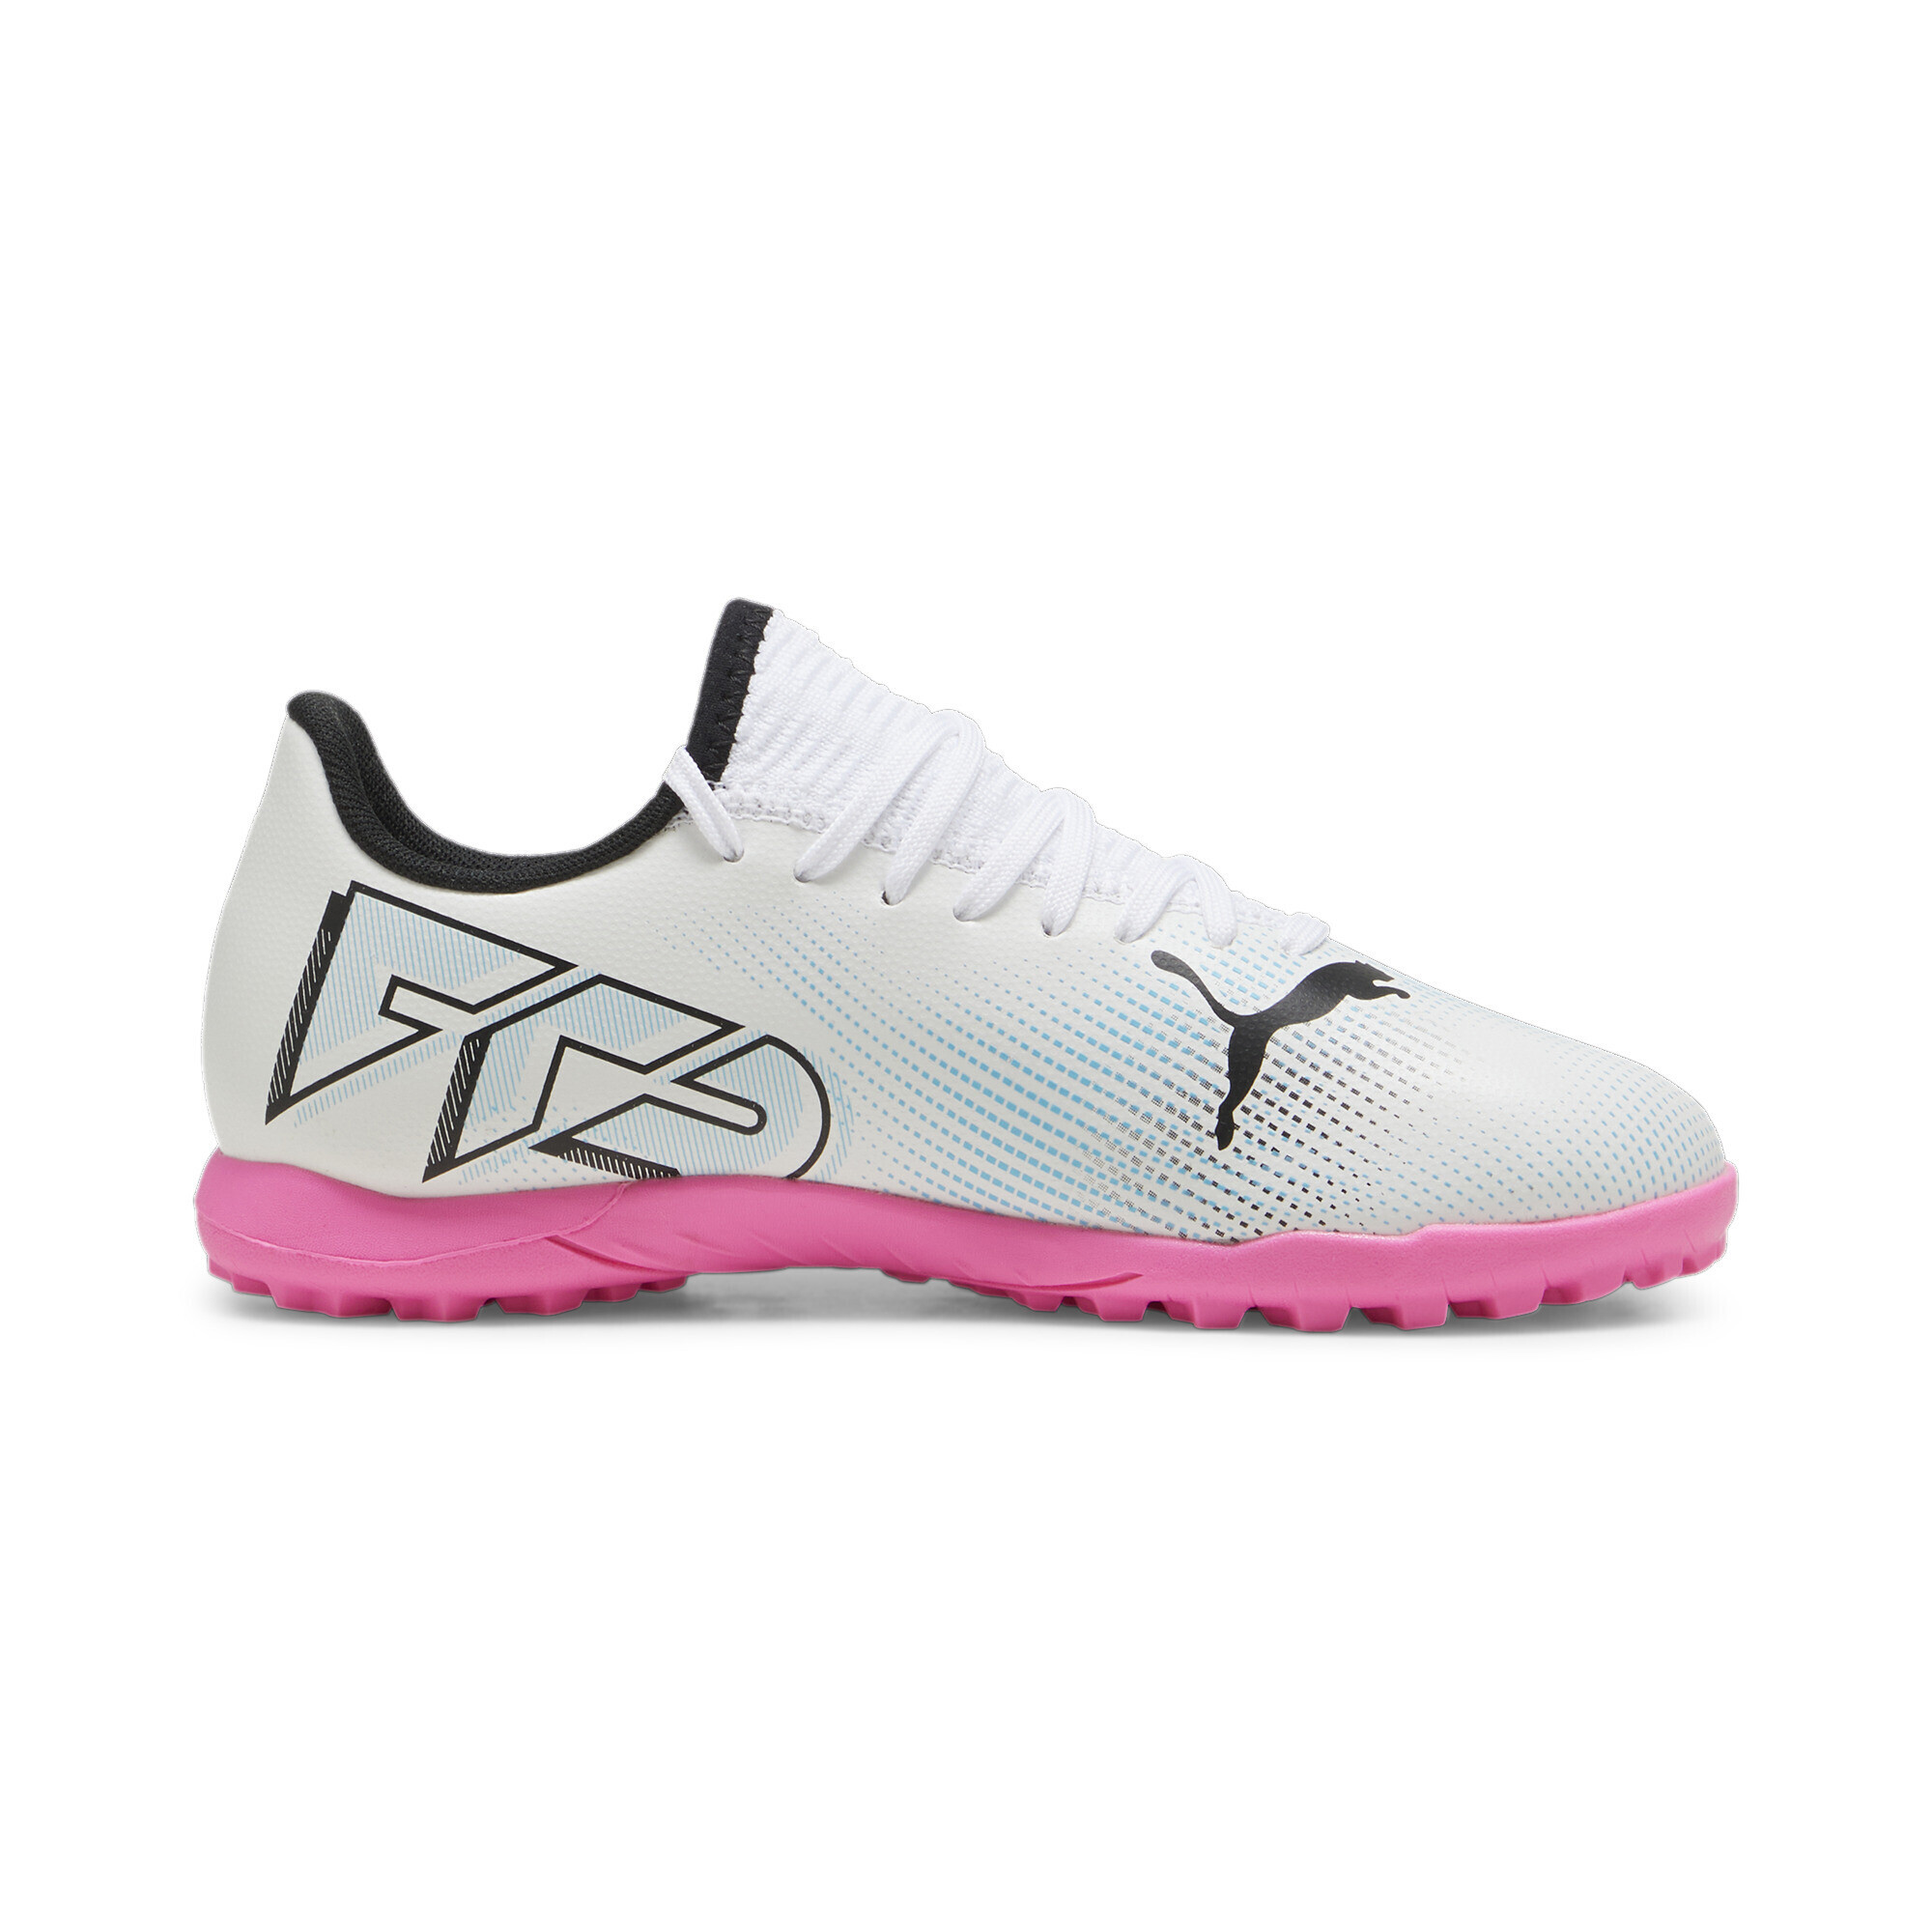 PUMA FUTURE 7 PLAY TT Youth Football Boots In White/Pink, Size EU 28